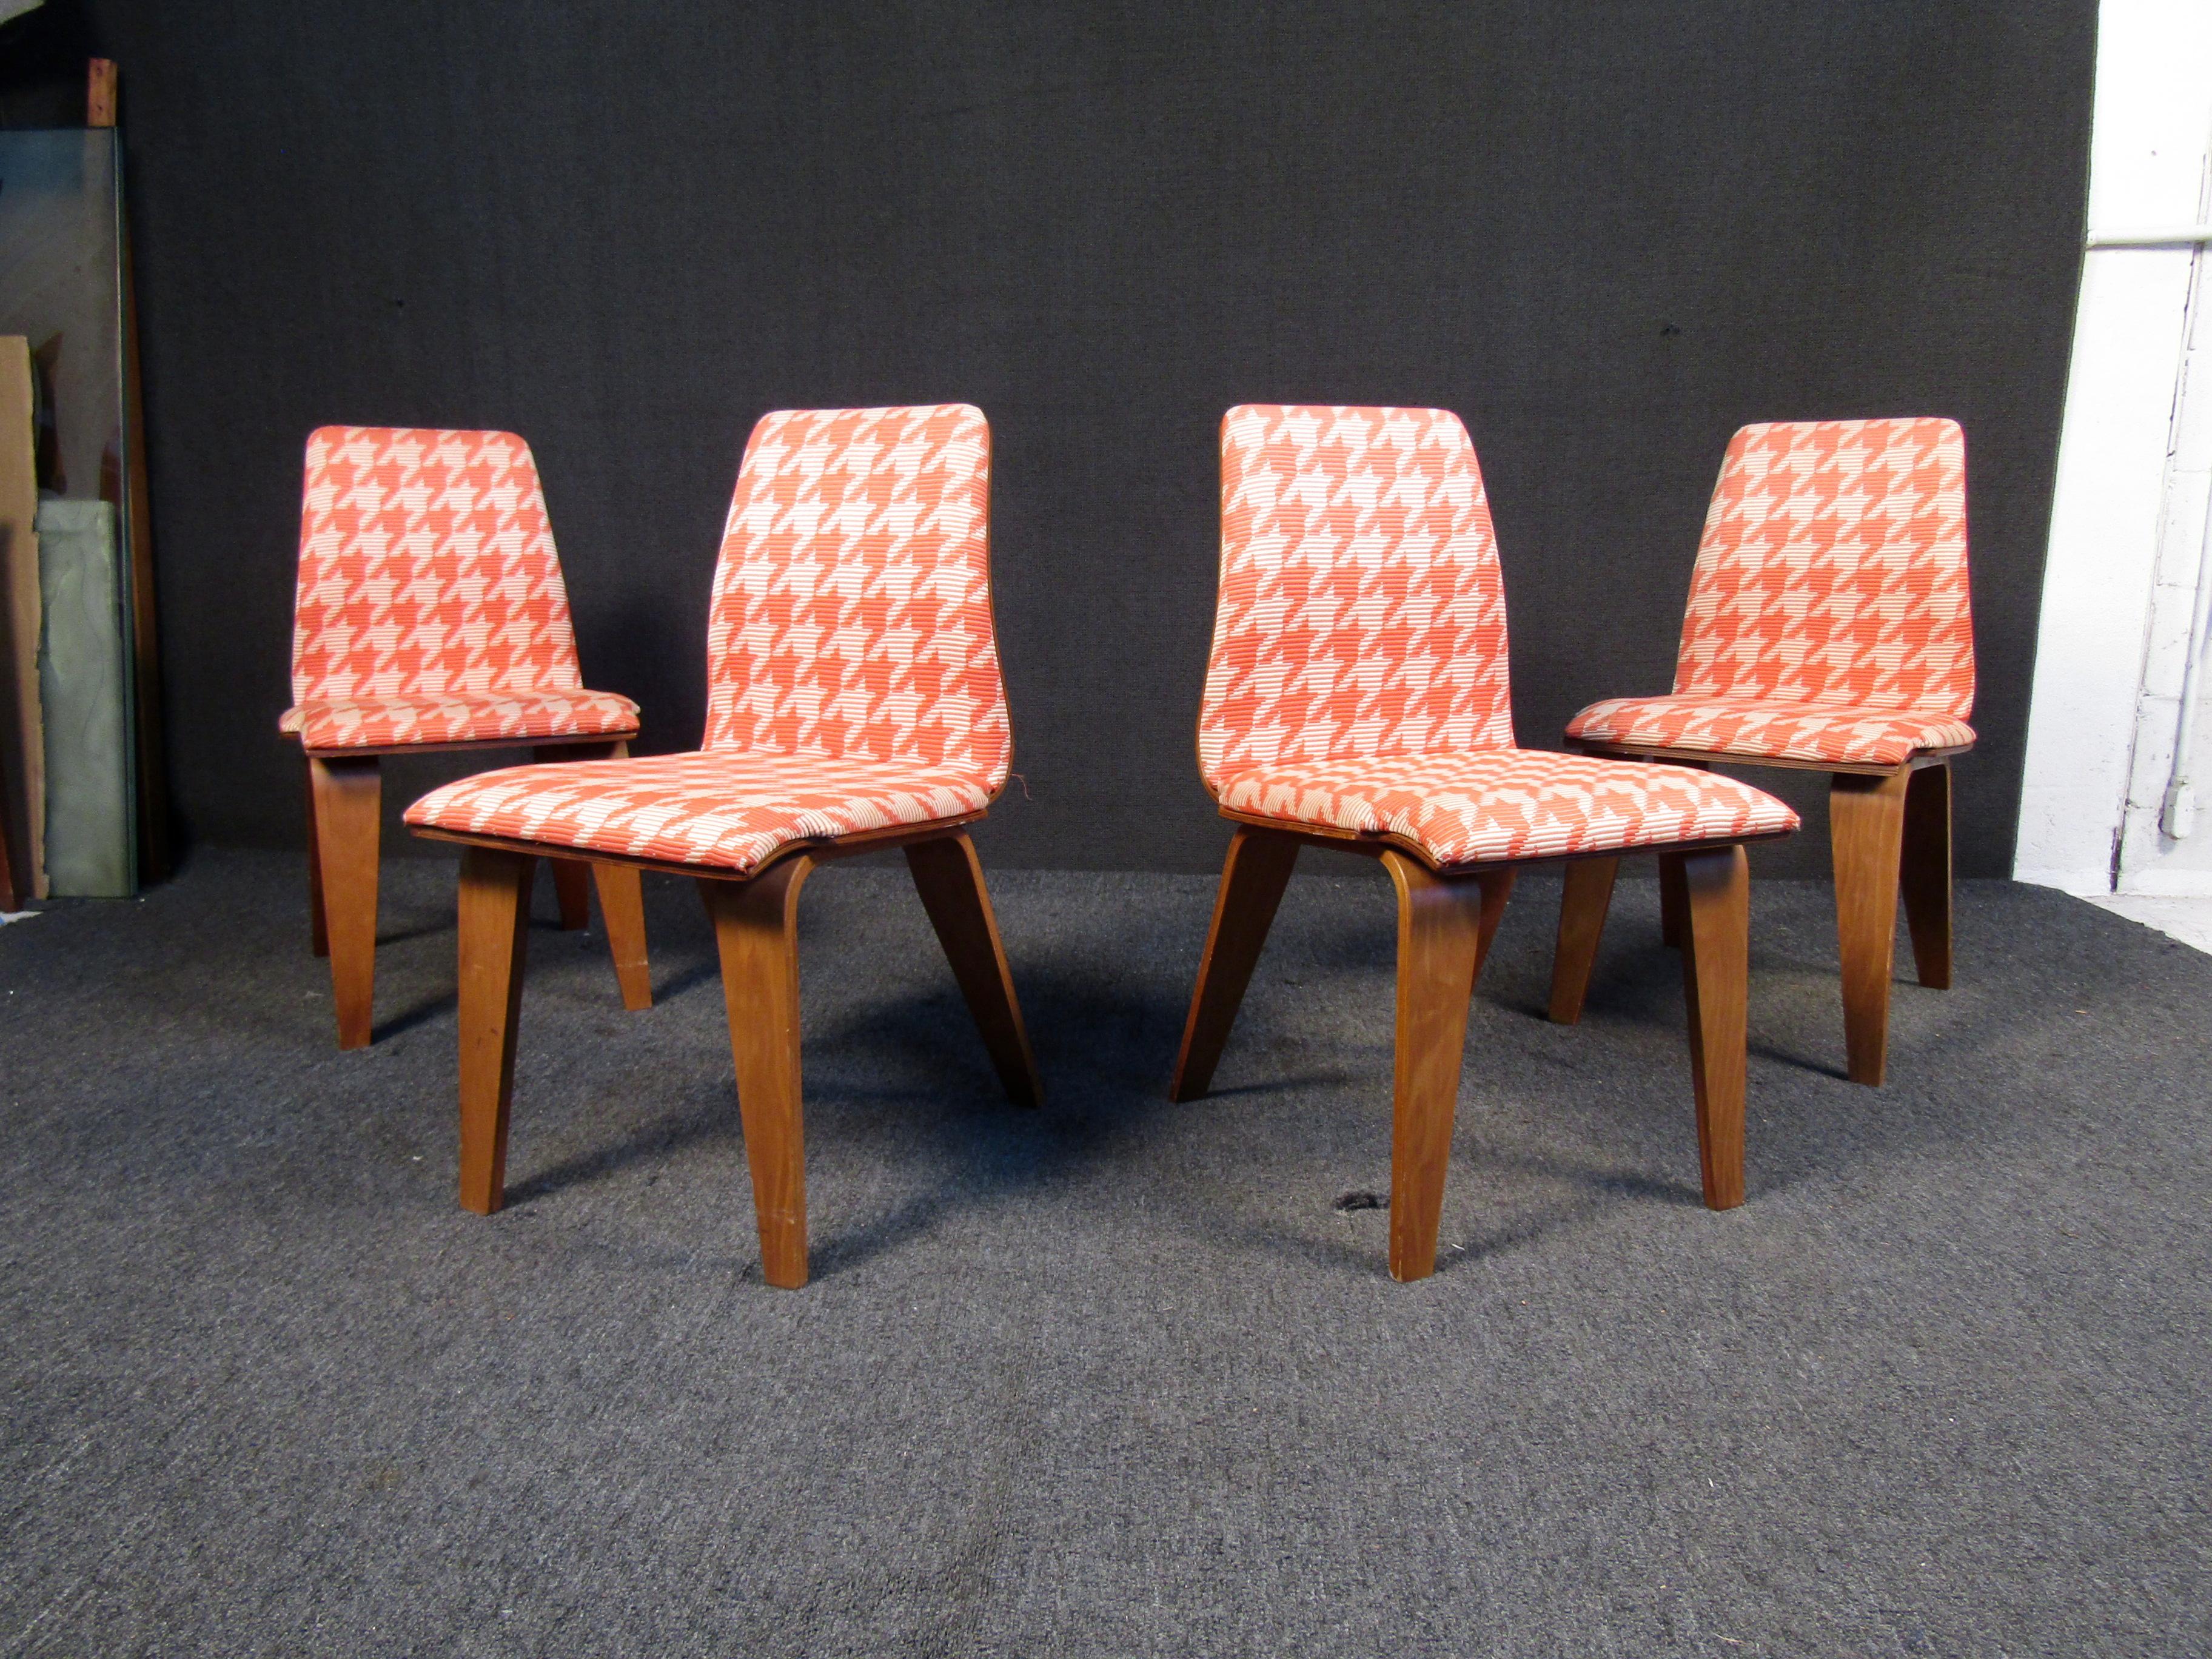 A matching set of four hounds-tooth pattern dining chairs inspired by Knoll. All chairs feature are padded and upholstered with the iconic design as well as a bentwood construction. These classic chairs will add mid century flare to any living or